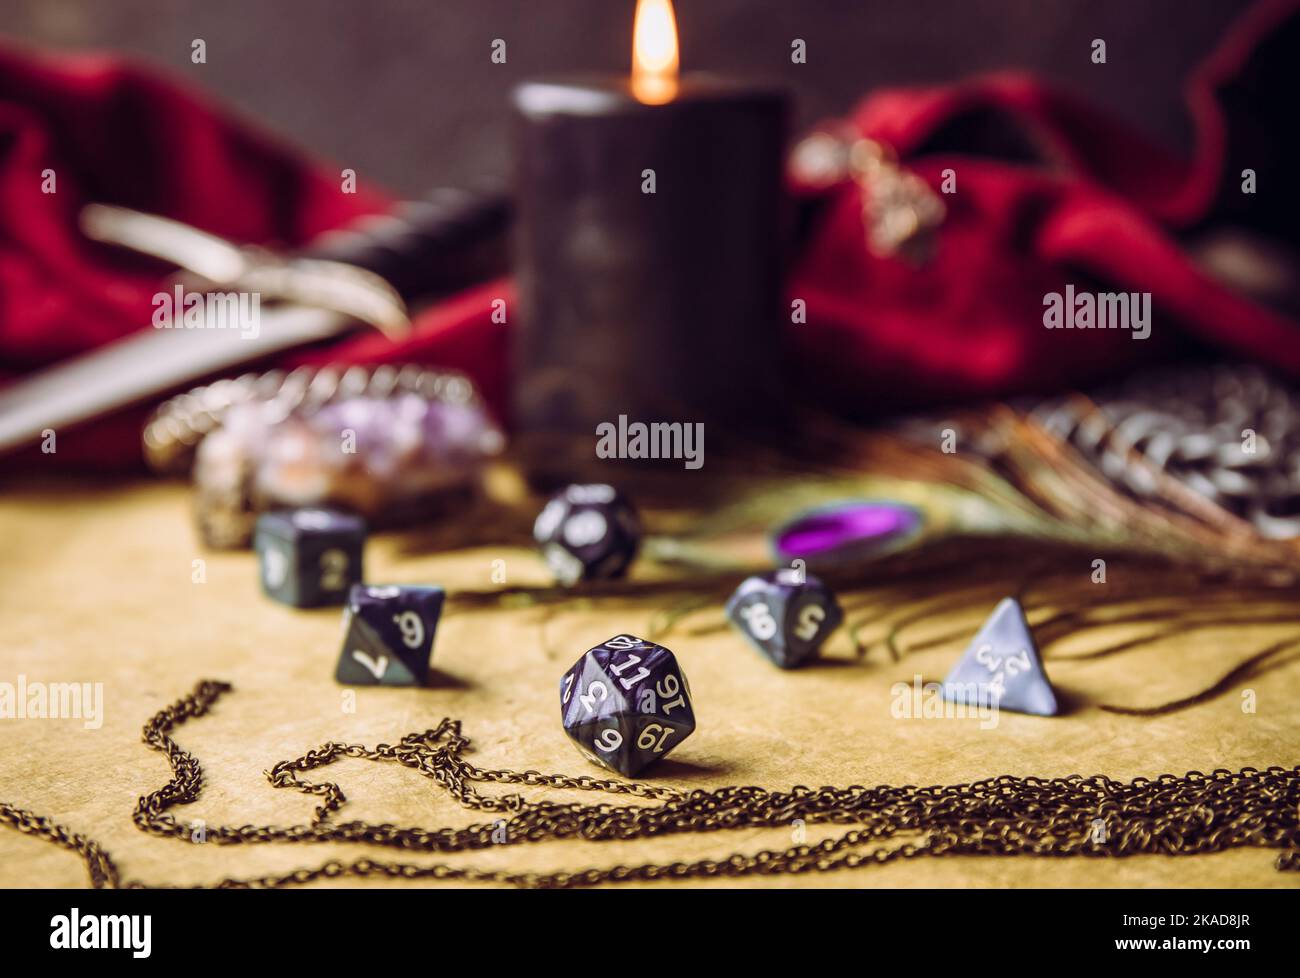 Fantasy role play board game still life concept. Selective focus on dice. Background decorated with various character objects tools. Stock Photo